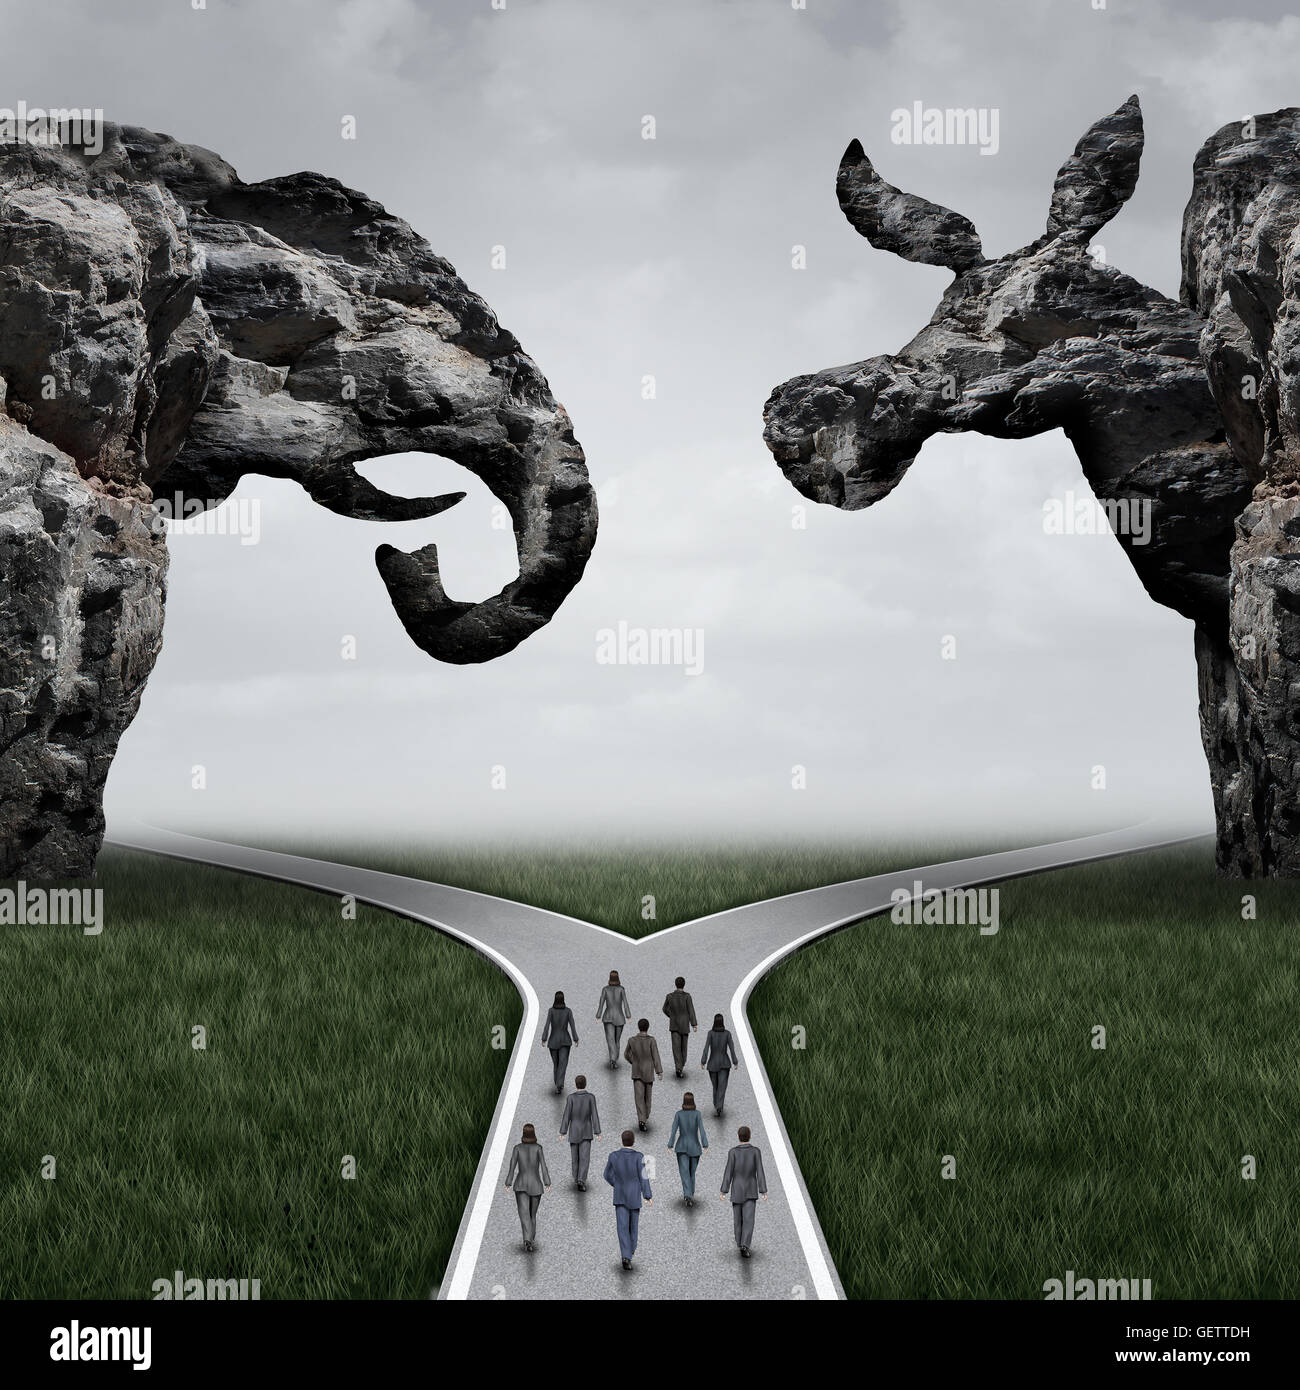 American election decision and voting in the USA concept as voters walking towards a fork in the road under a cliff shaped as an elephant and donkey representing conservative and liberal choices with 3D illustration elements. Stock Photo